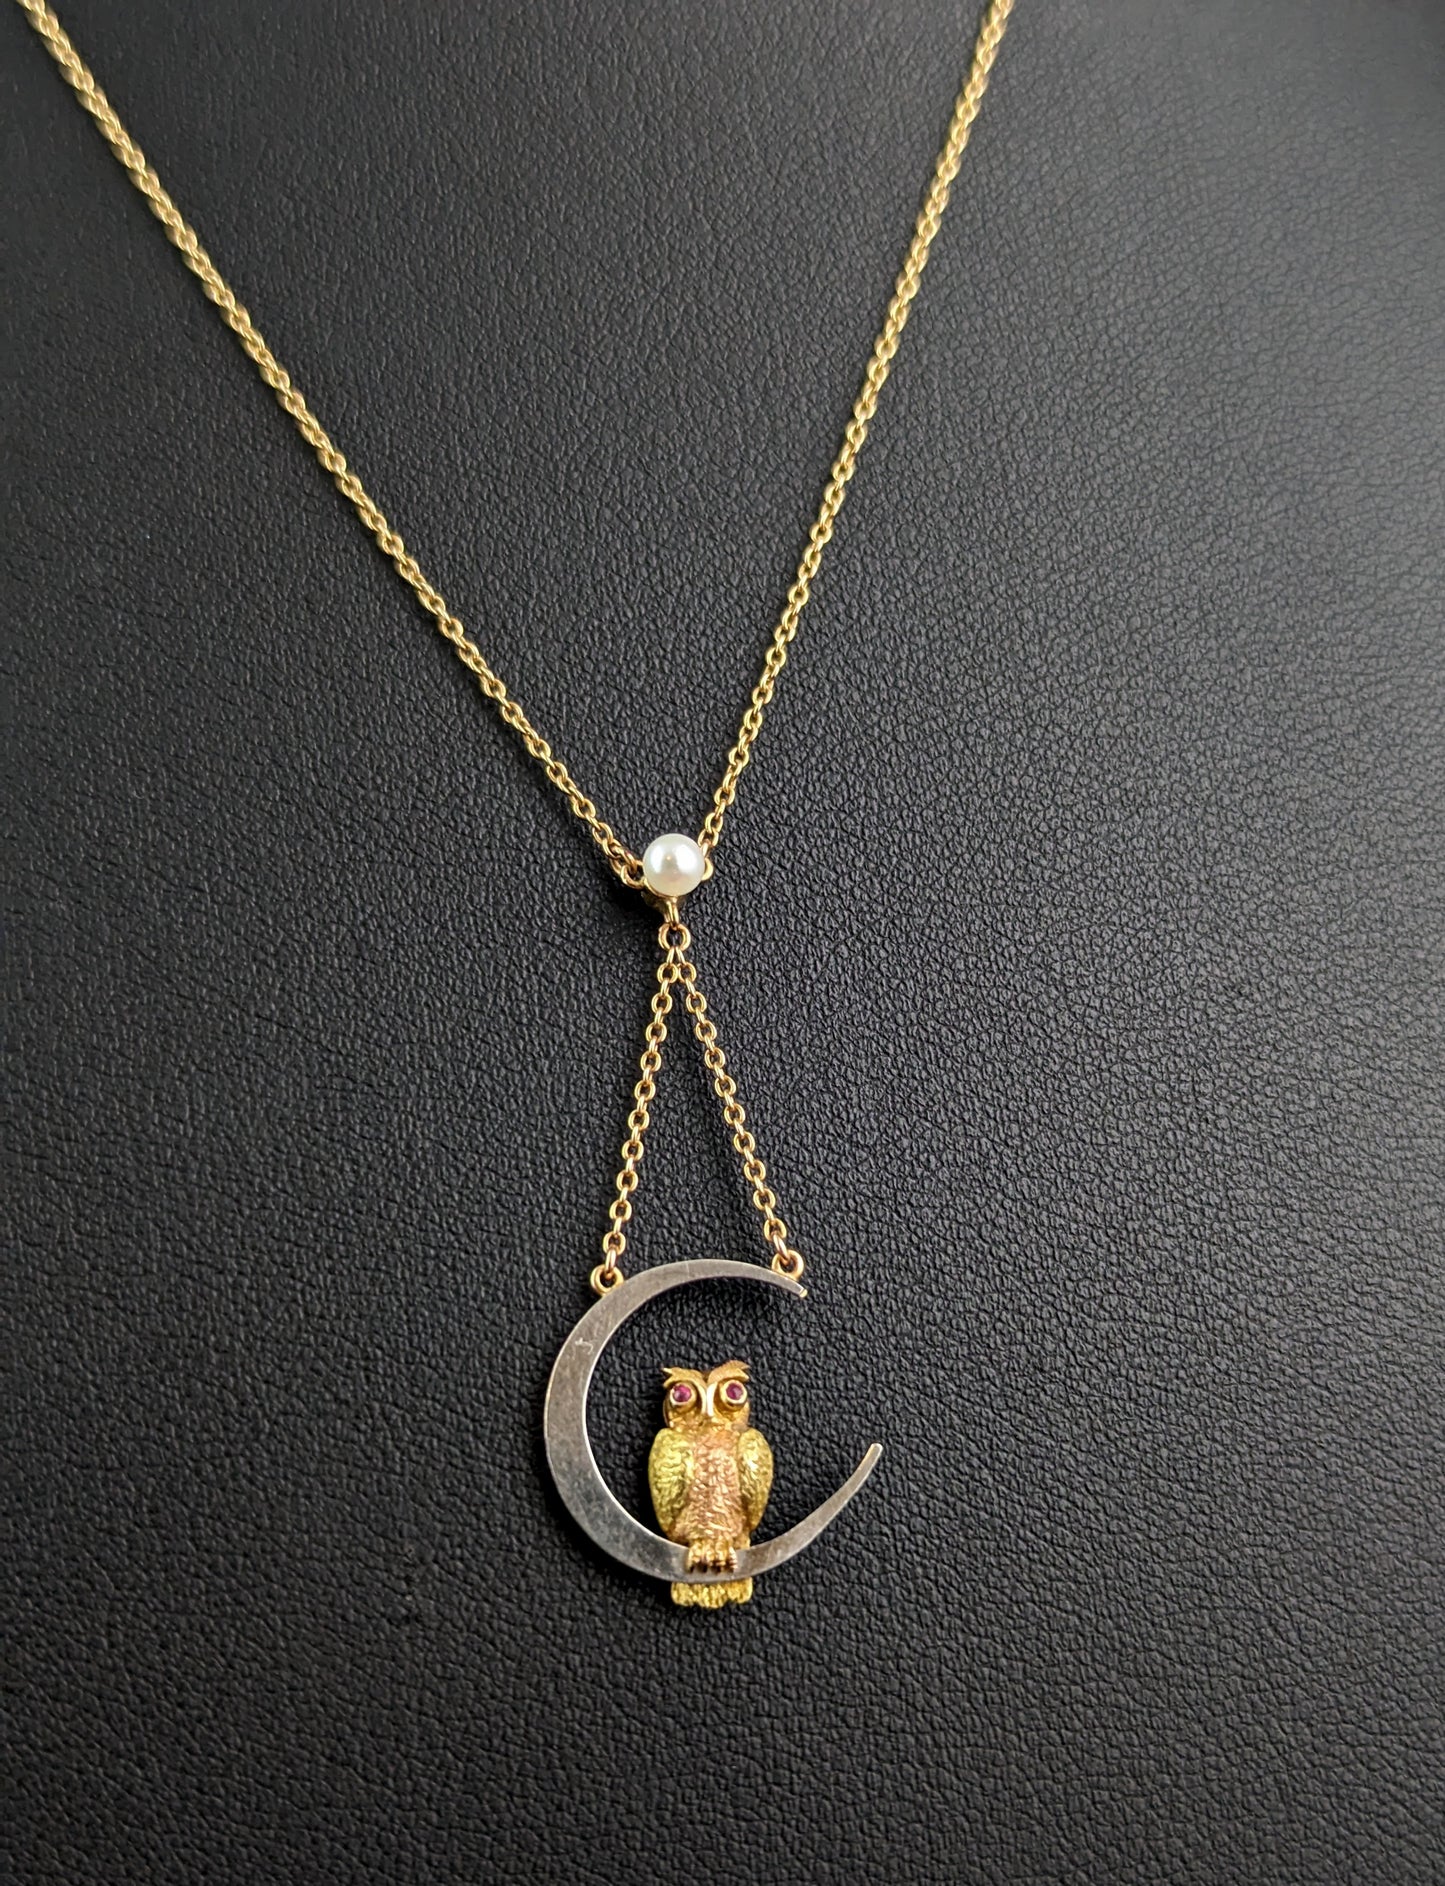 Antique Owl and Crescent moon pendant necklace, 15ct gold and Platinum, Ruby and Pearl